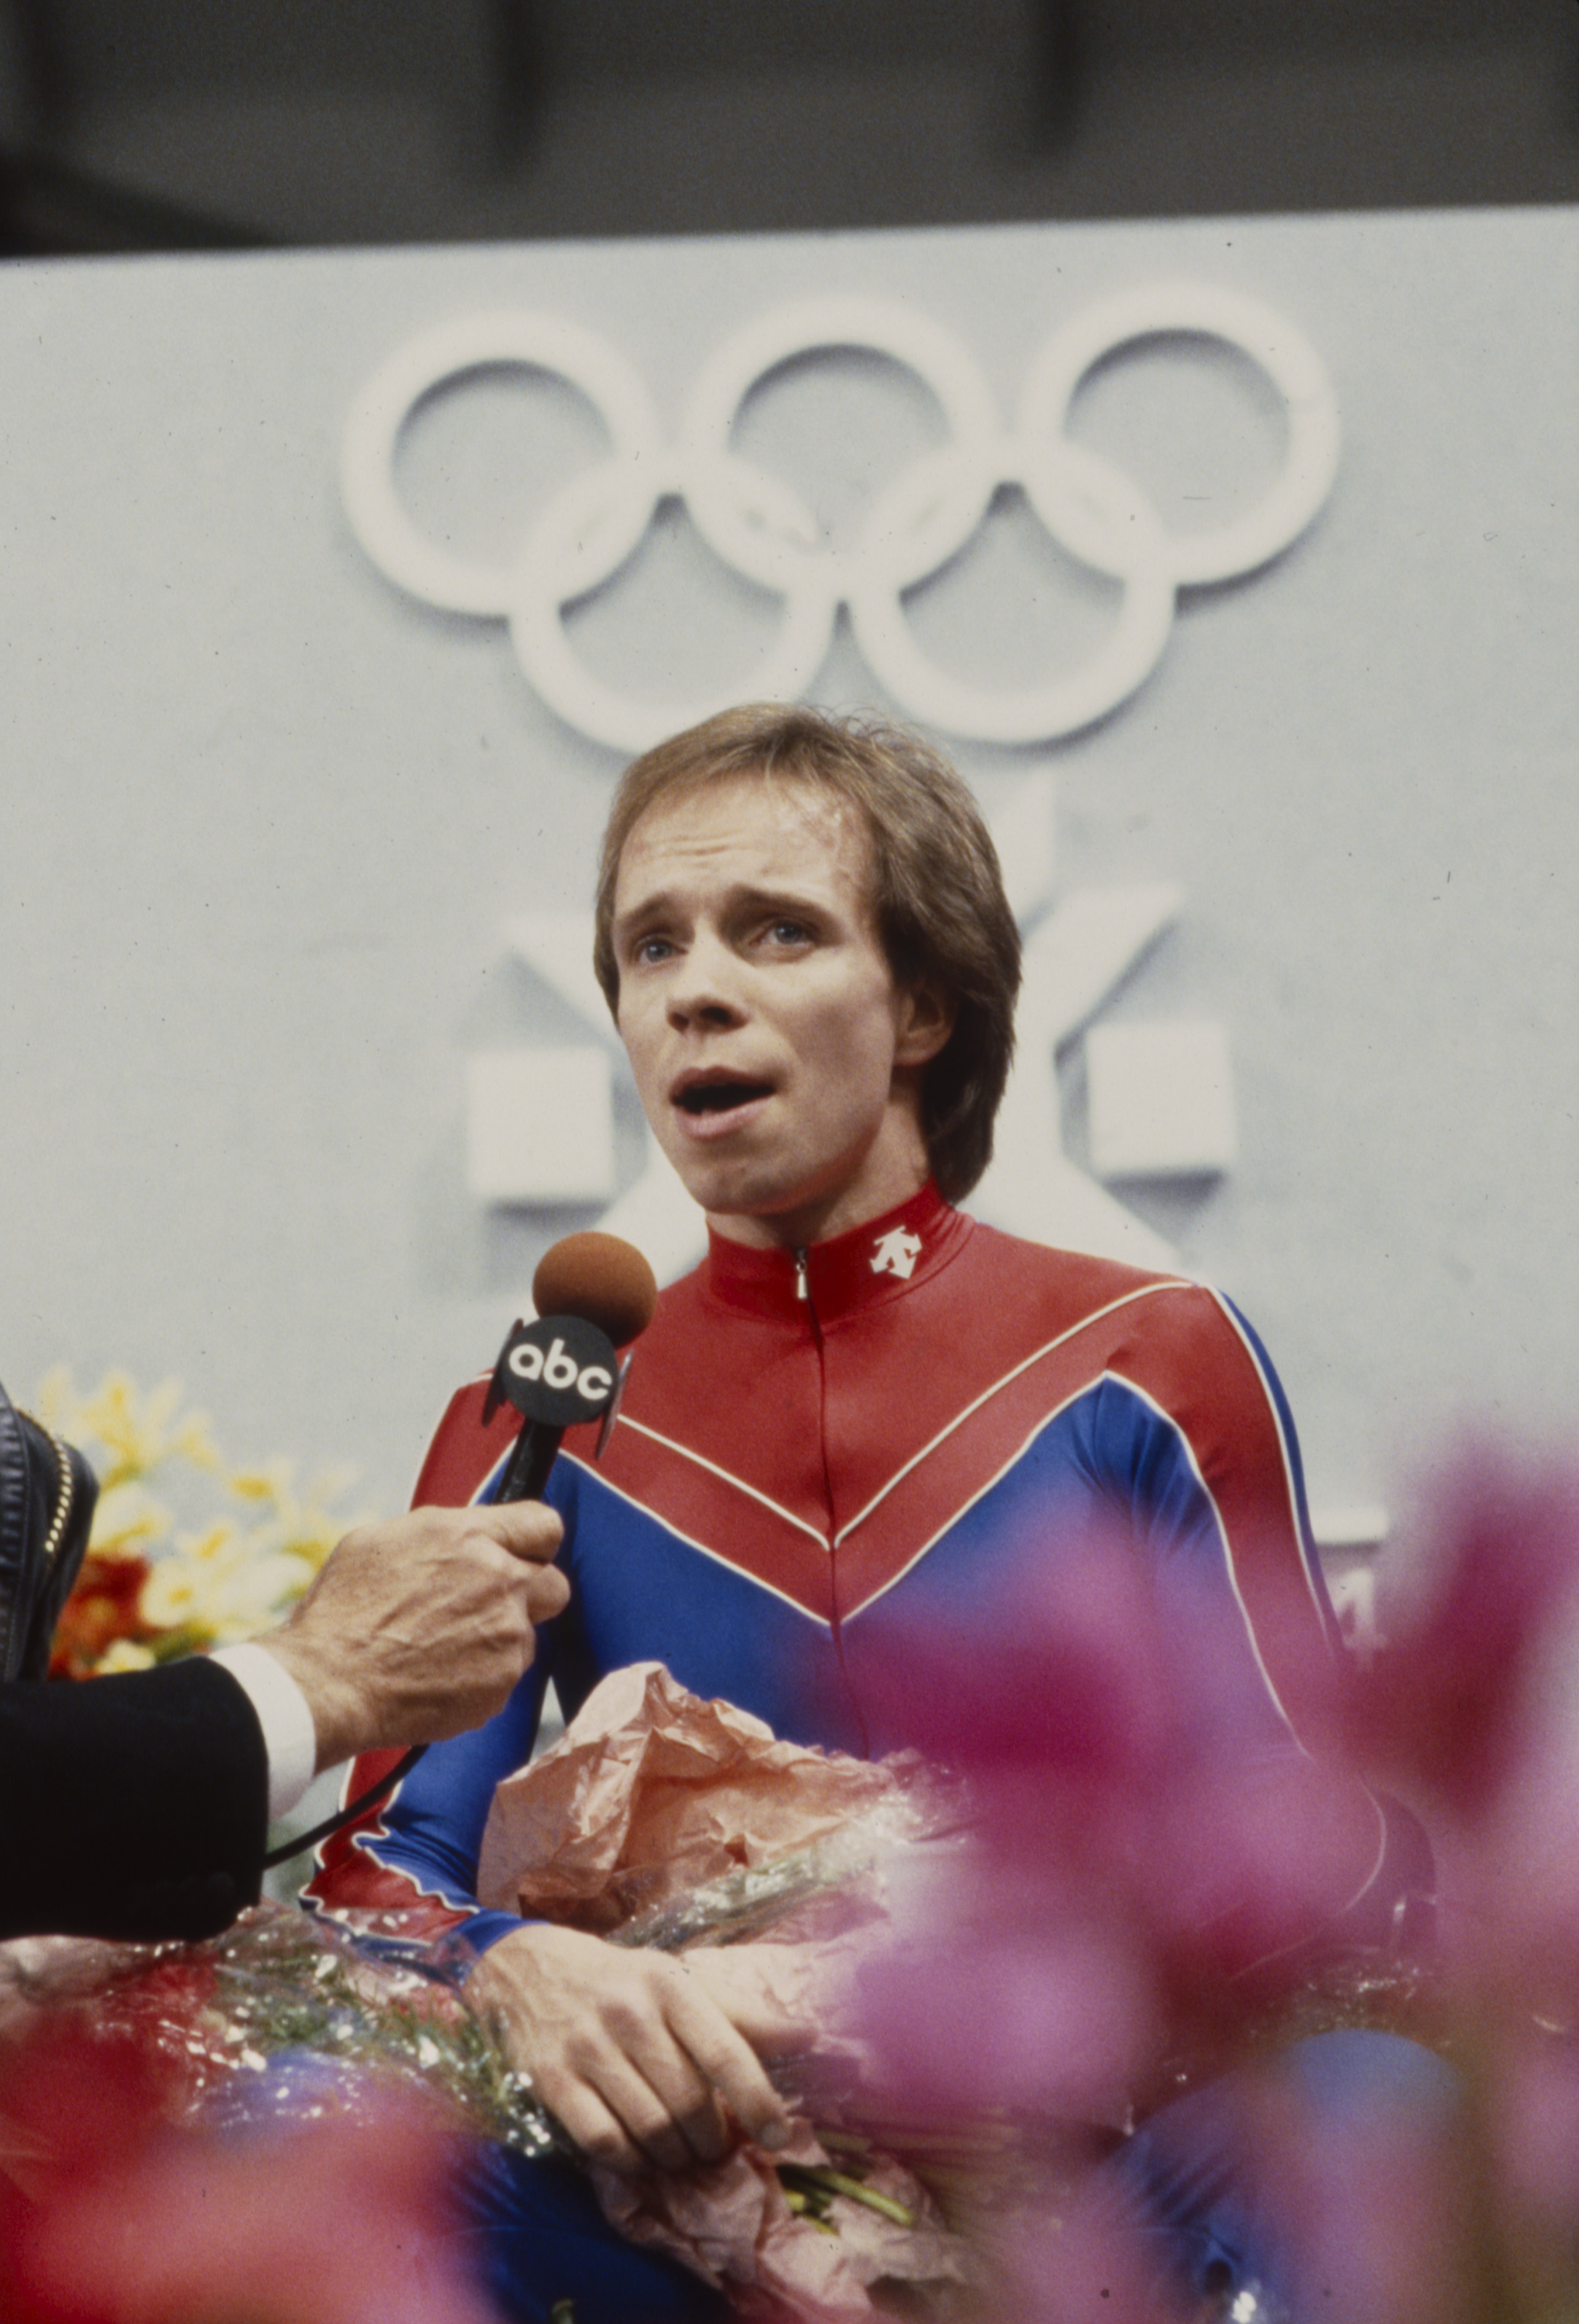 Scott Hamilton after competing in the Men's figure skating event at the 1984 Winter Olympics / XIV Olympic Winter Games on February 1, 1984 | Source: Getty Images